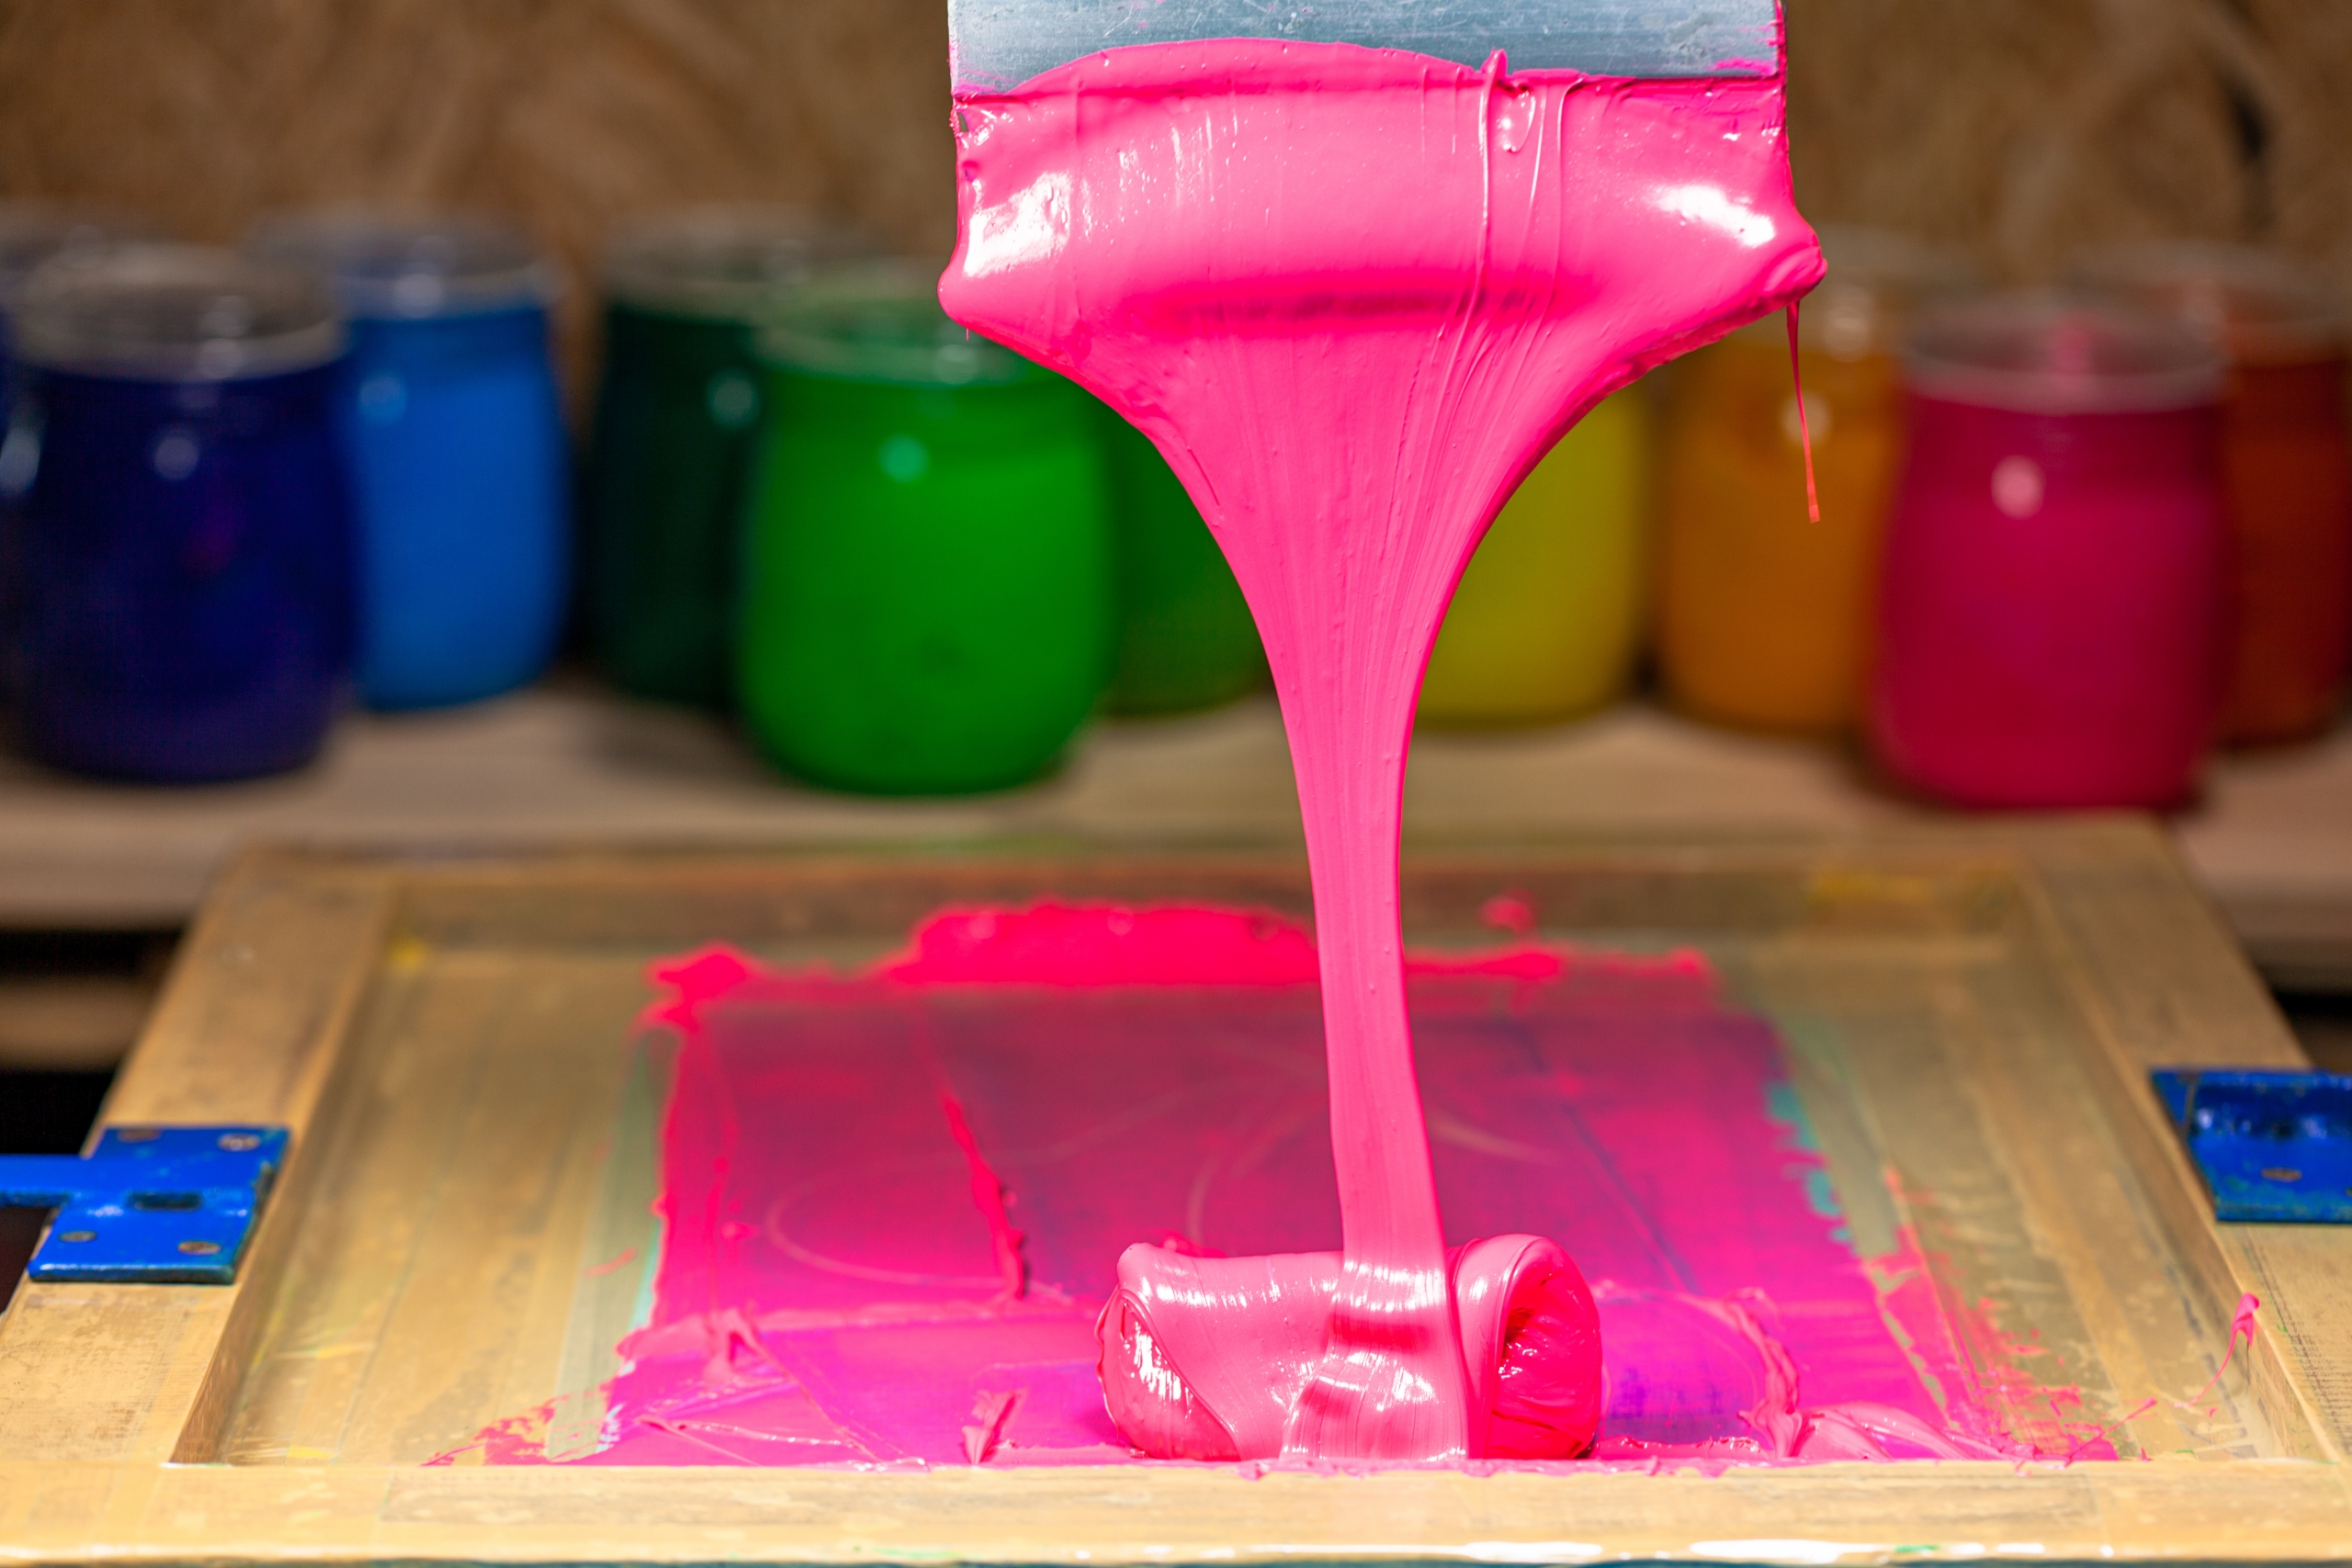 Choosing the Best Ink For Your Screen Printing Project